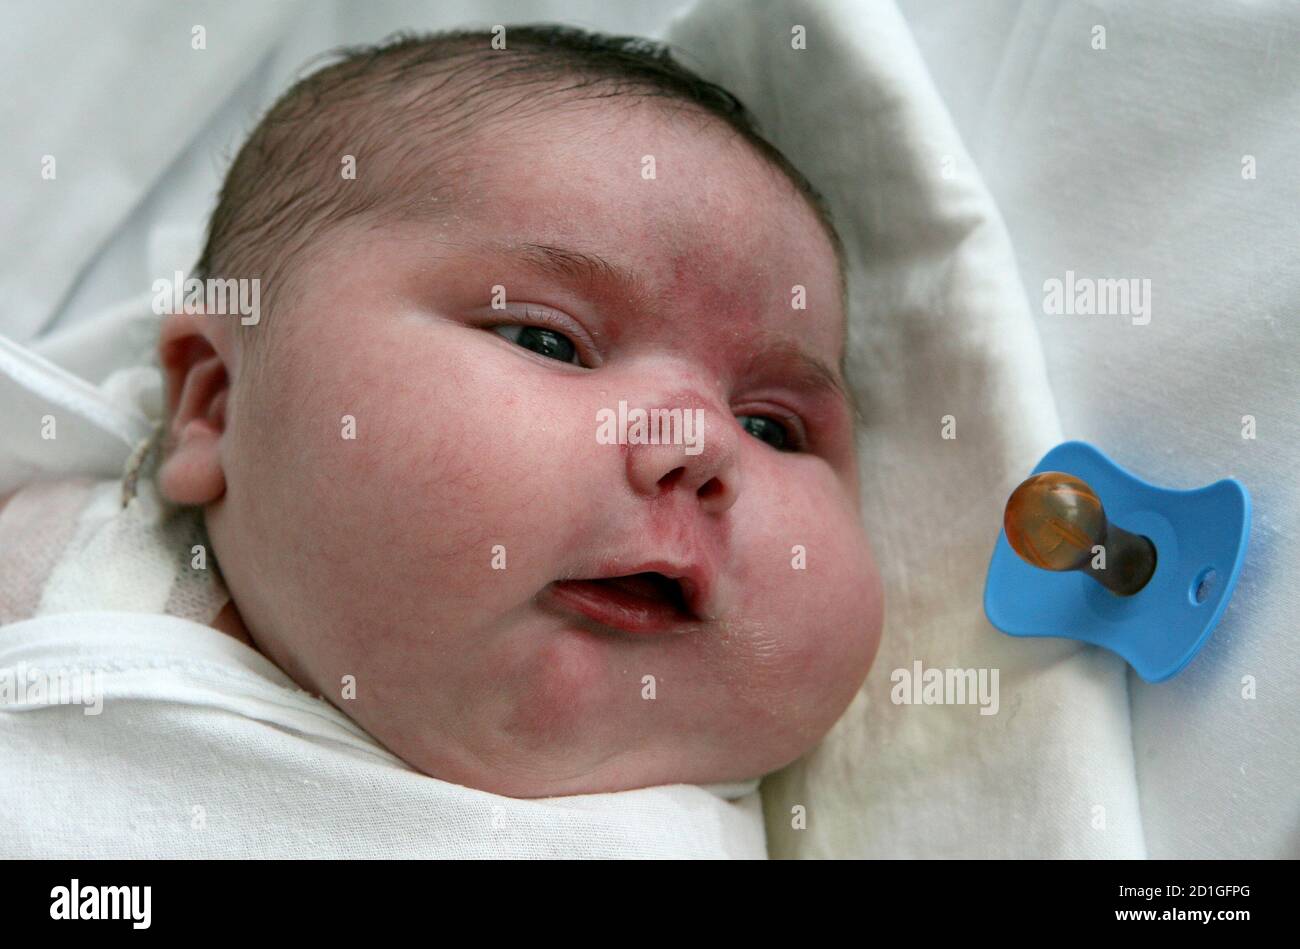 Baby girl Nadia, who weighed 7.75 kg after birth, lies in a maternity ward in the Siberian city of Barnaul September 26, 2007.  One Siberian mother has done more than her fair share to heal Russia's dire population decline. Tatyana Khalina shocked her husband by giving birth to a 7.75 kg (17.1 lbs) baby girl this month, her 12th child.  Picture taken September 26, 2007.   REUTERS/Andrey Kasprishin   (RUSSIA) Banque D'Images